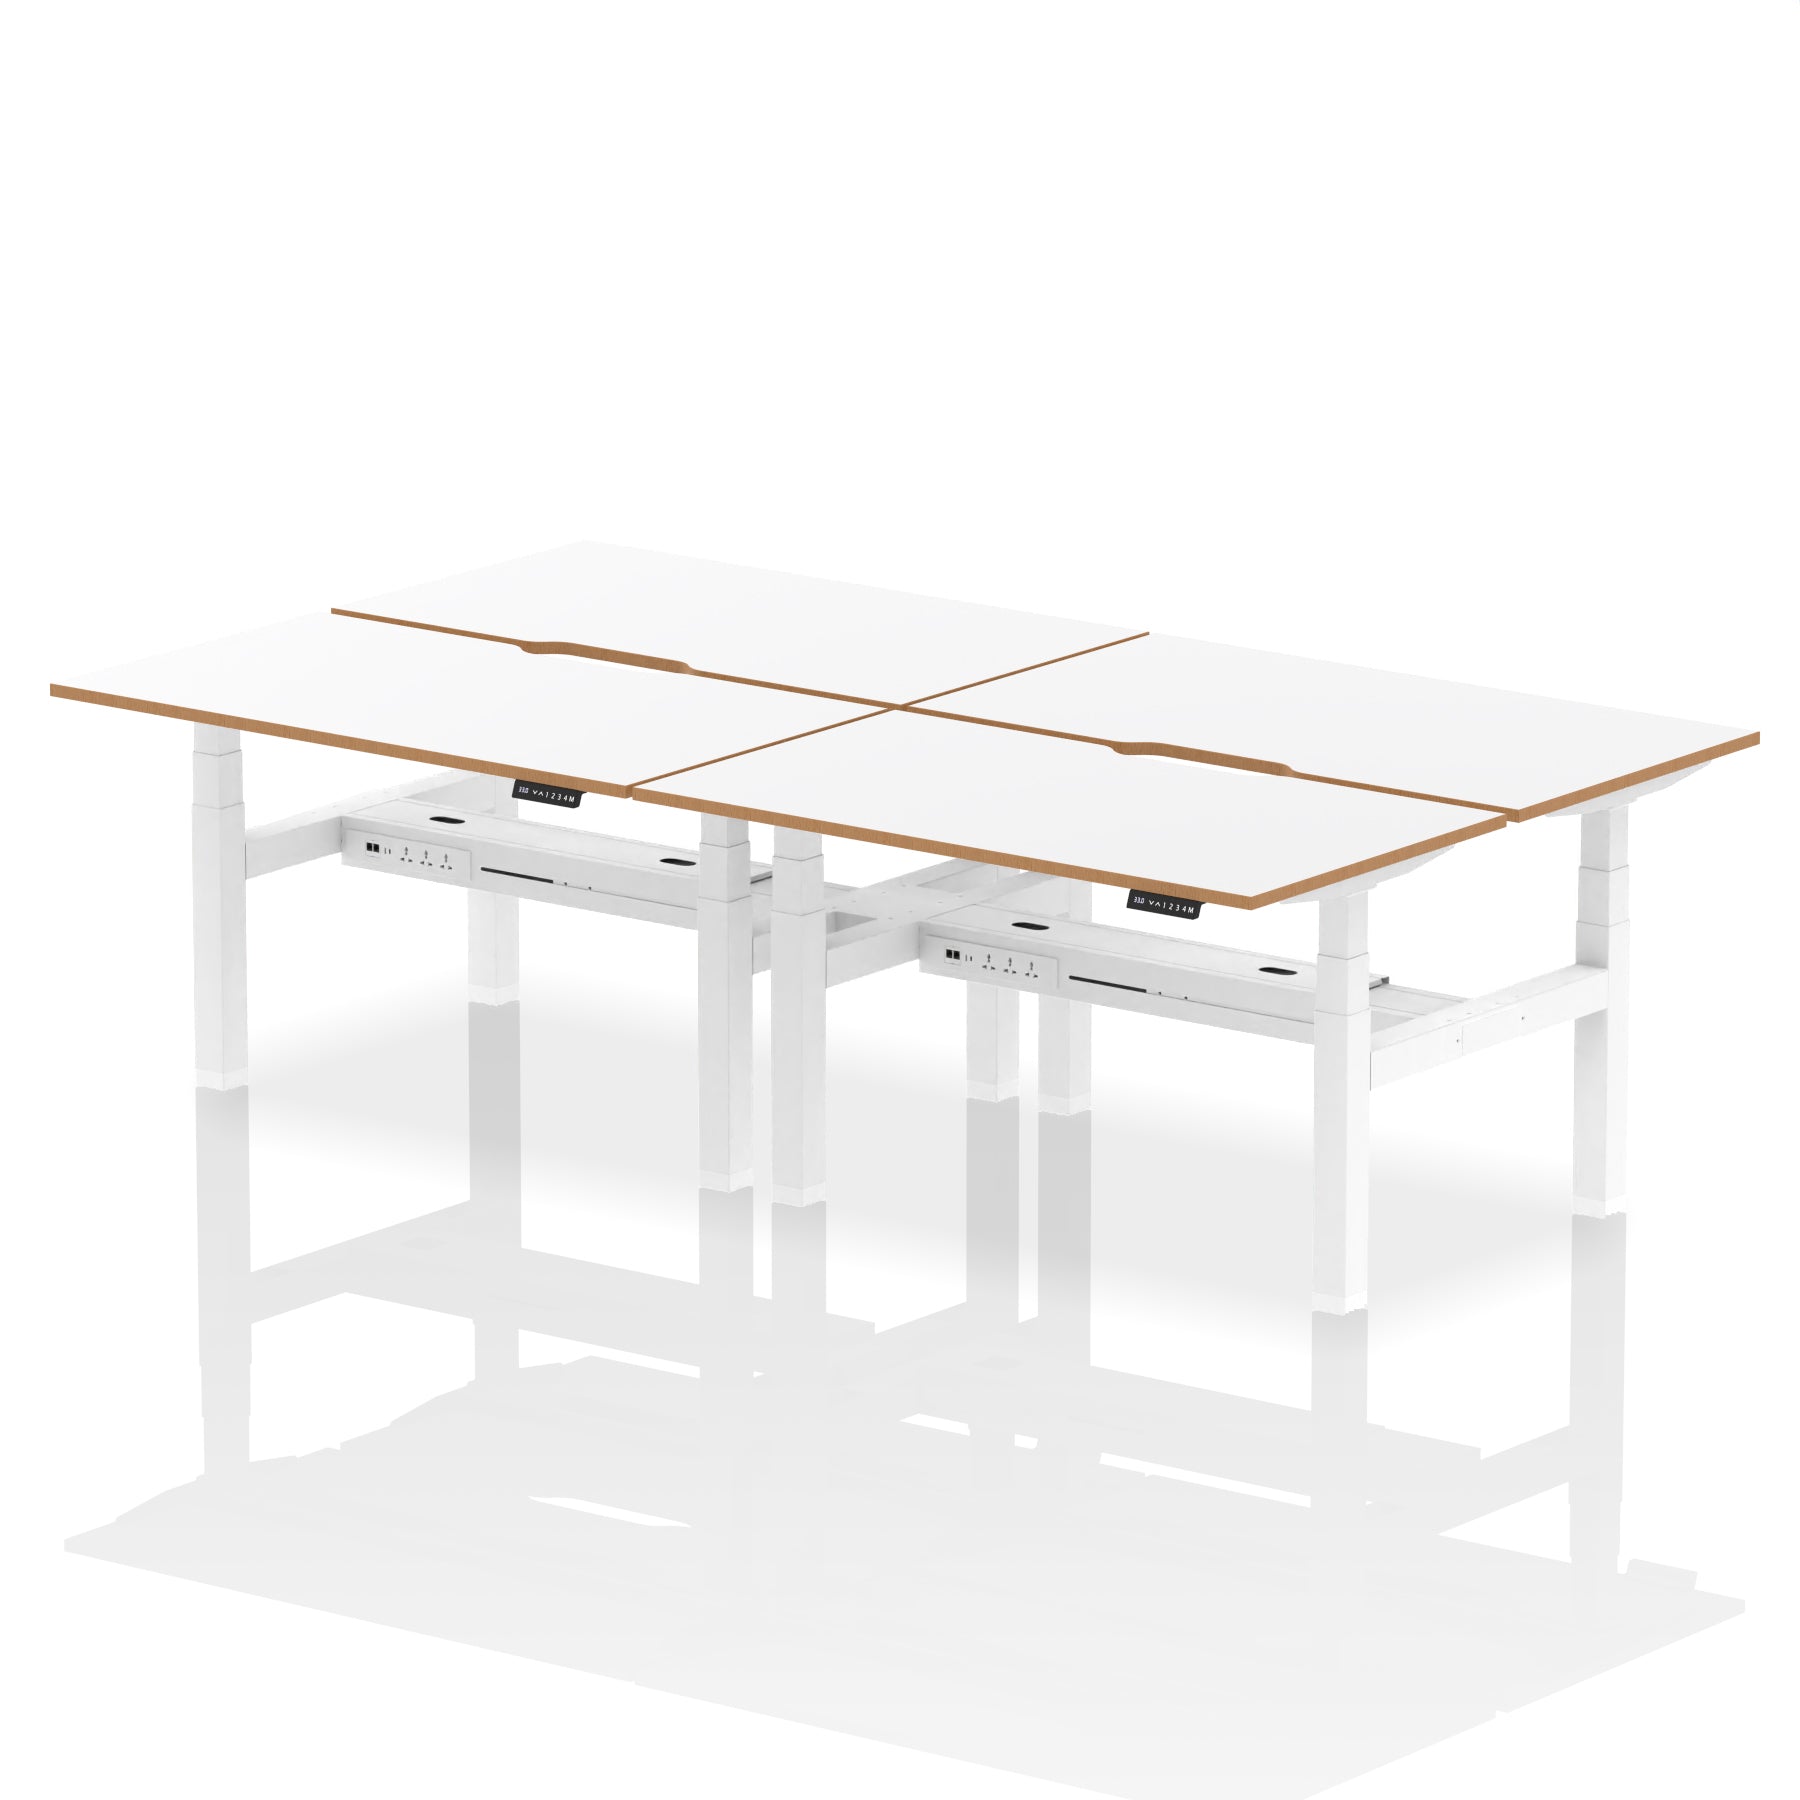 Oslo Air Back-to-Back Height Adjustable Bench Desk